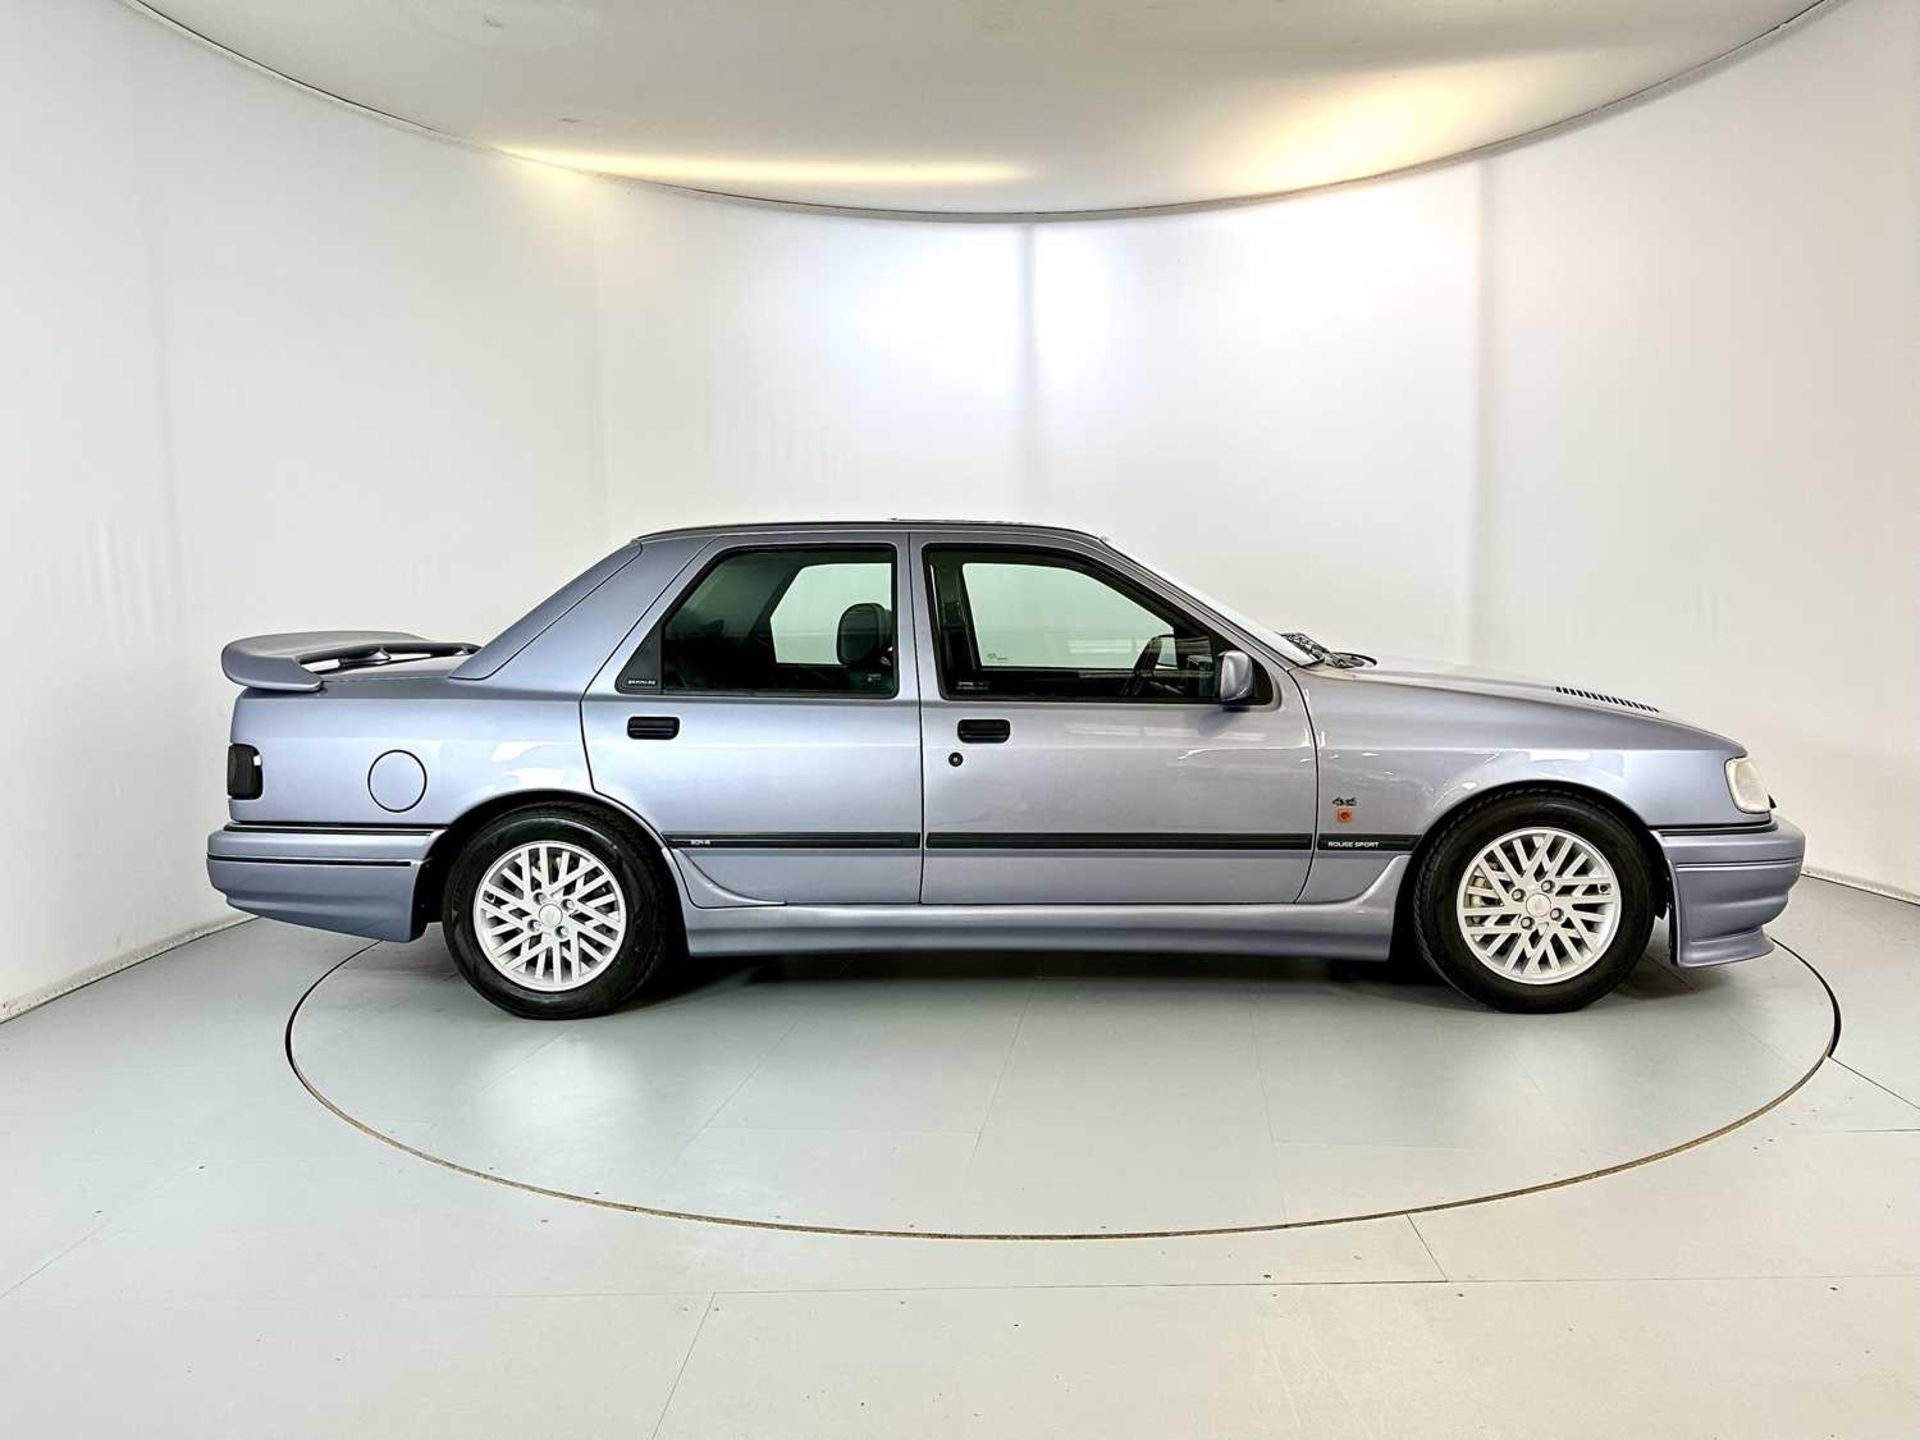 1991 Ford Sierra RS Cosworth Rouse Sport 304R - Image 11 of 40